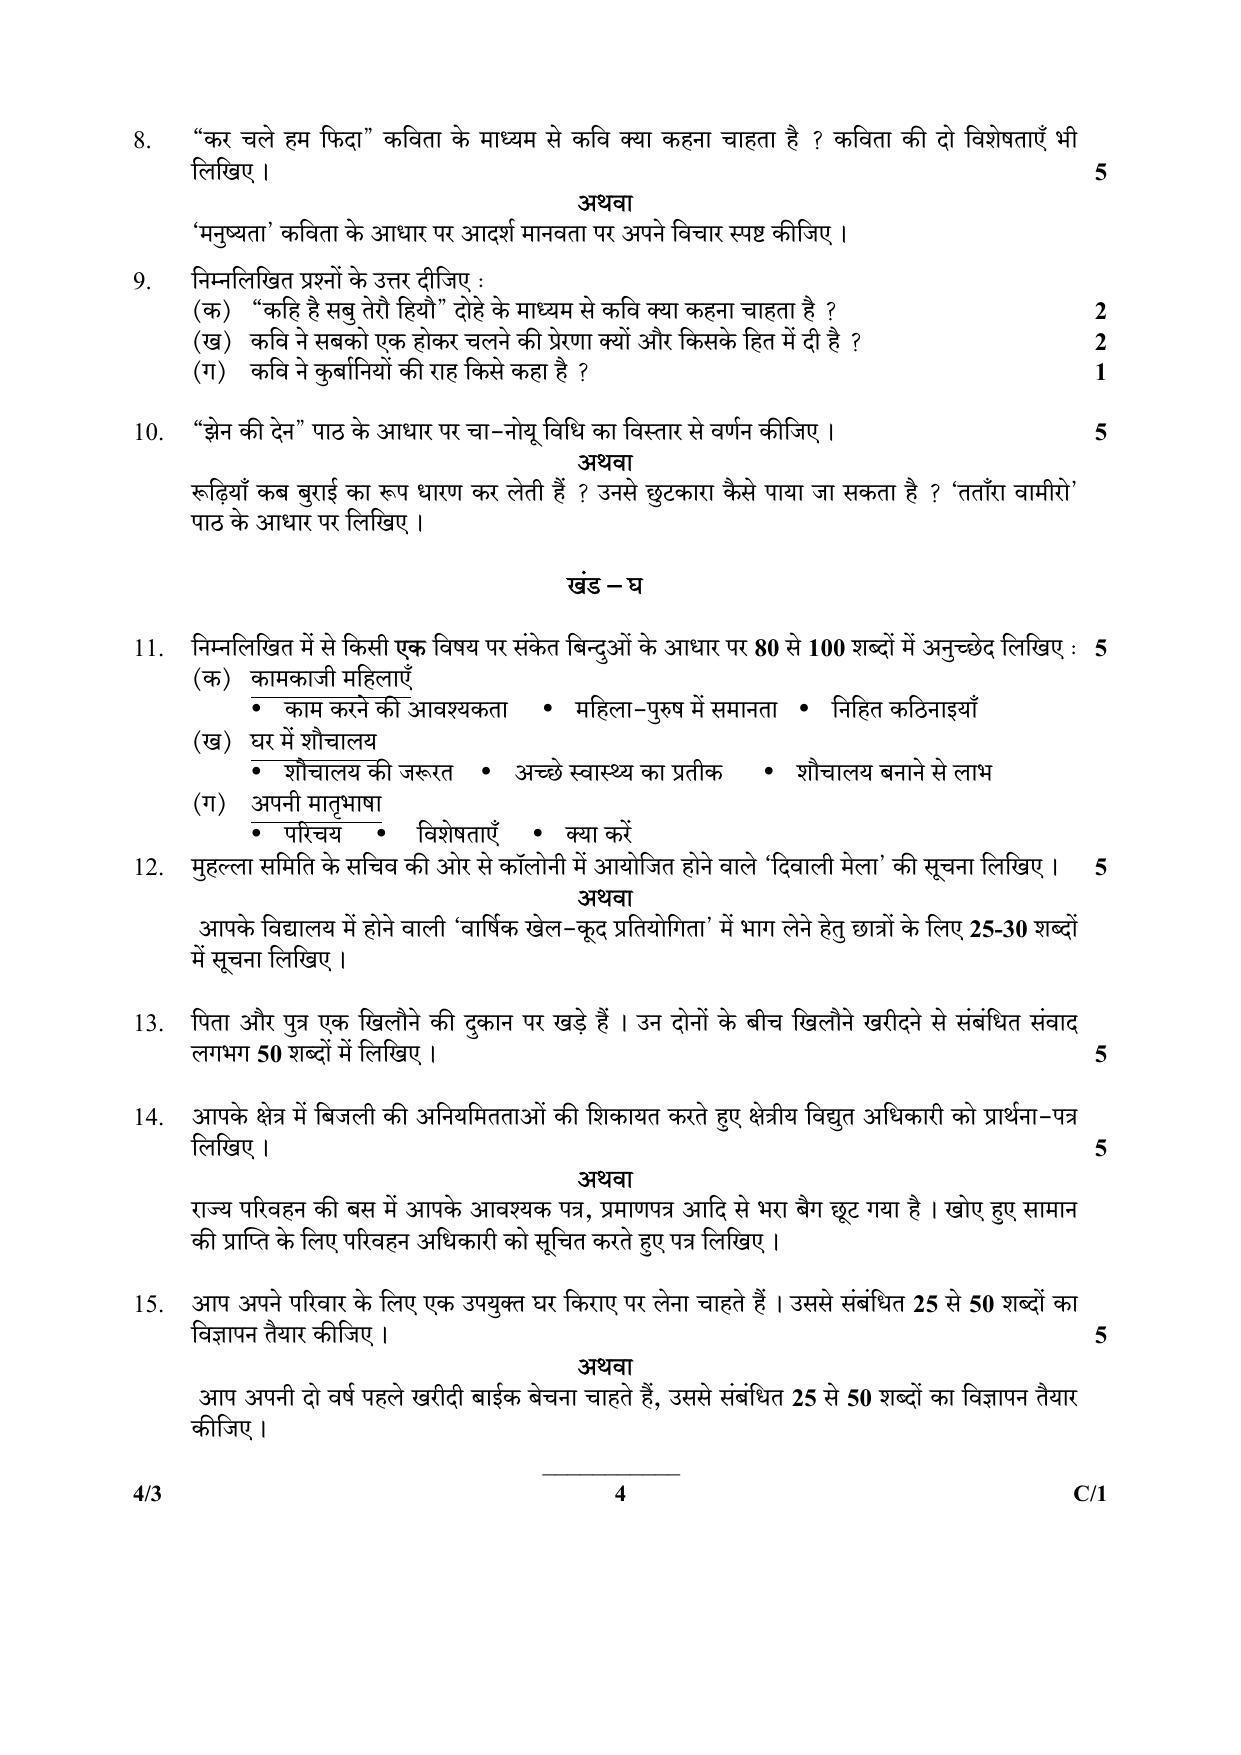 CBSE Class 10 4-3_Hindi 2018 Compartment Question Paper - Page 4